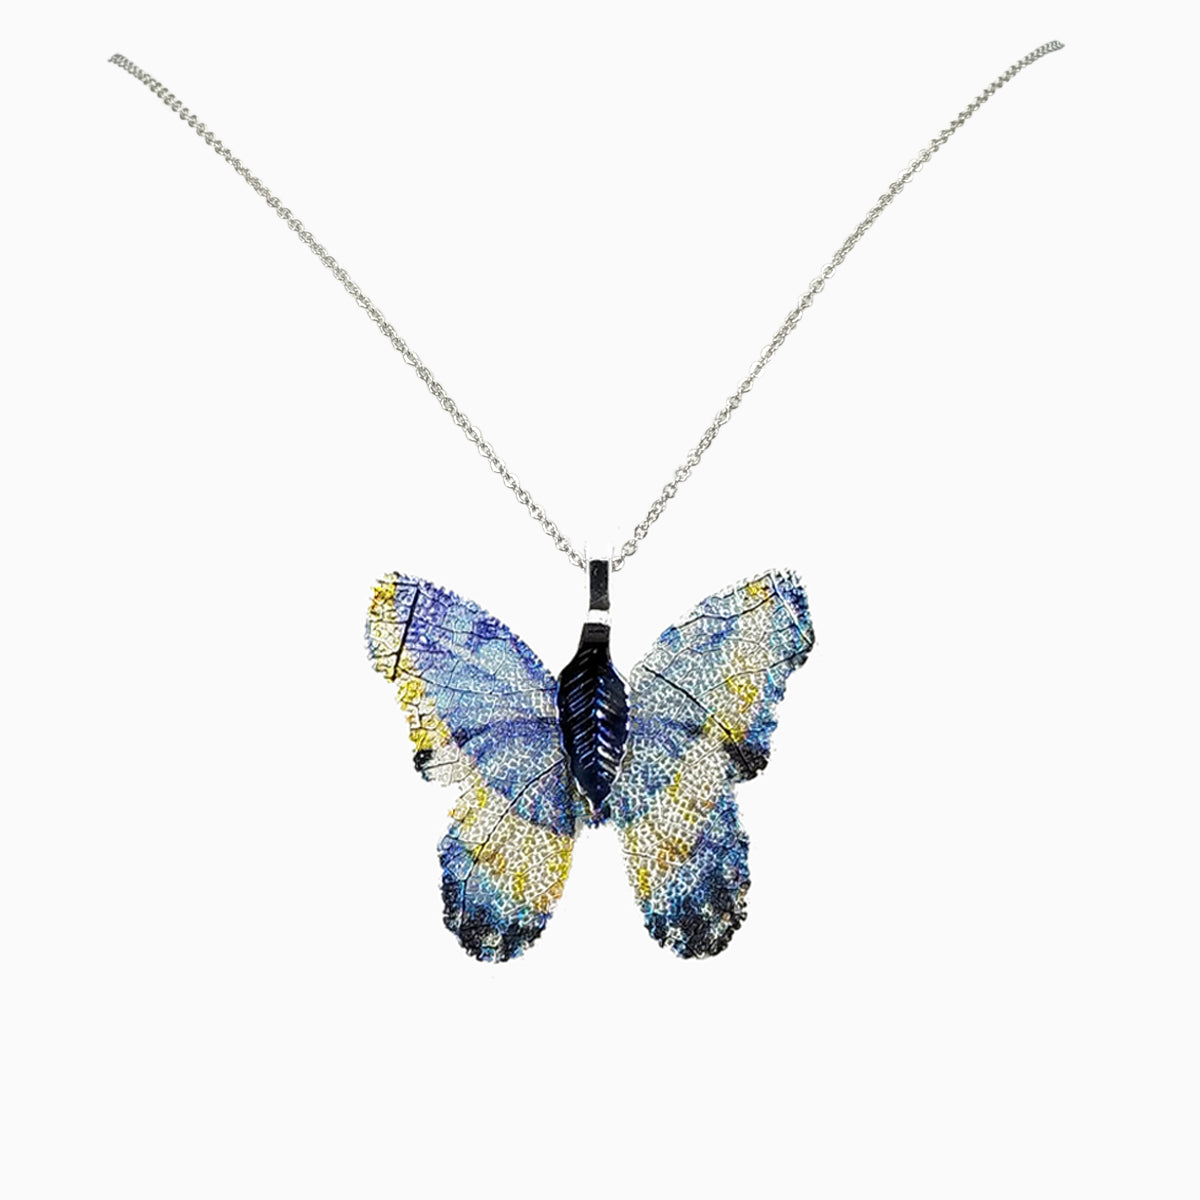 Butterfly - Real Leaf Pendant Necklace